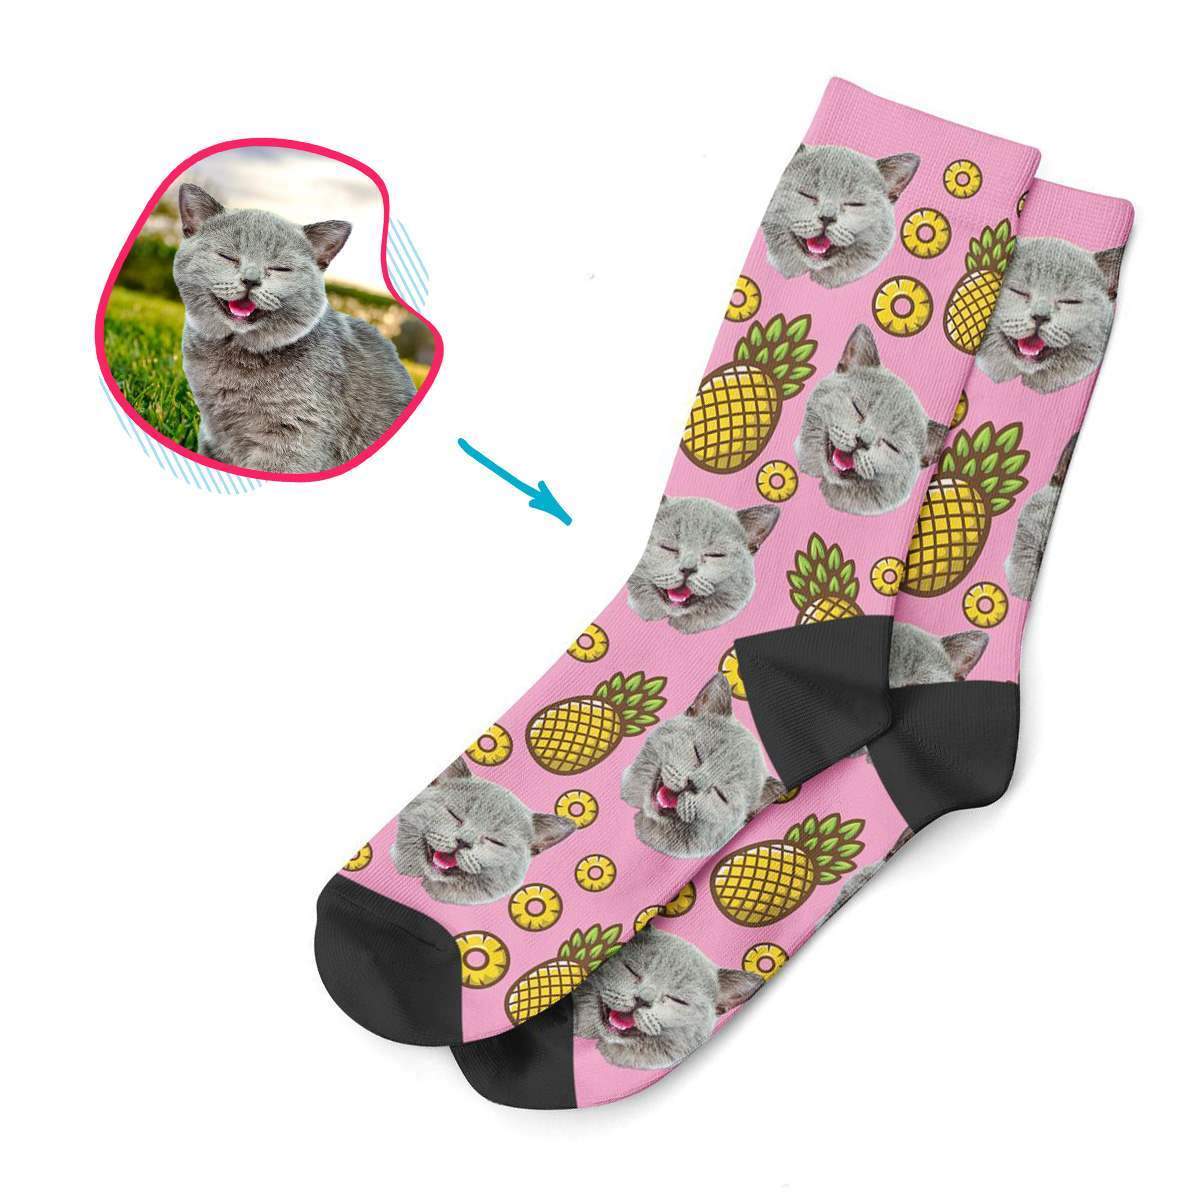 pink Fruits socks personalized with photo of face printed on them